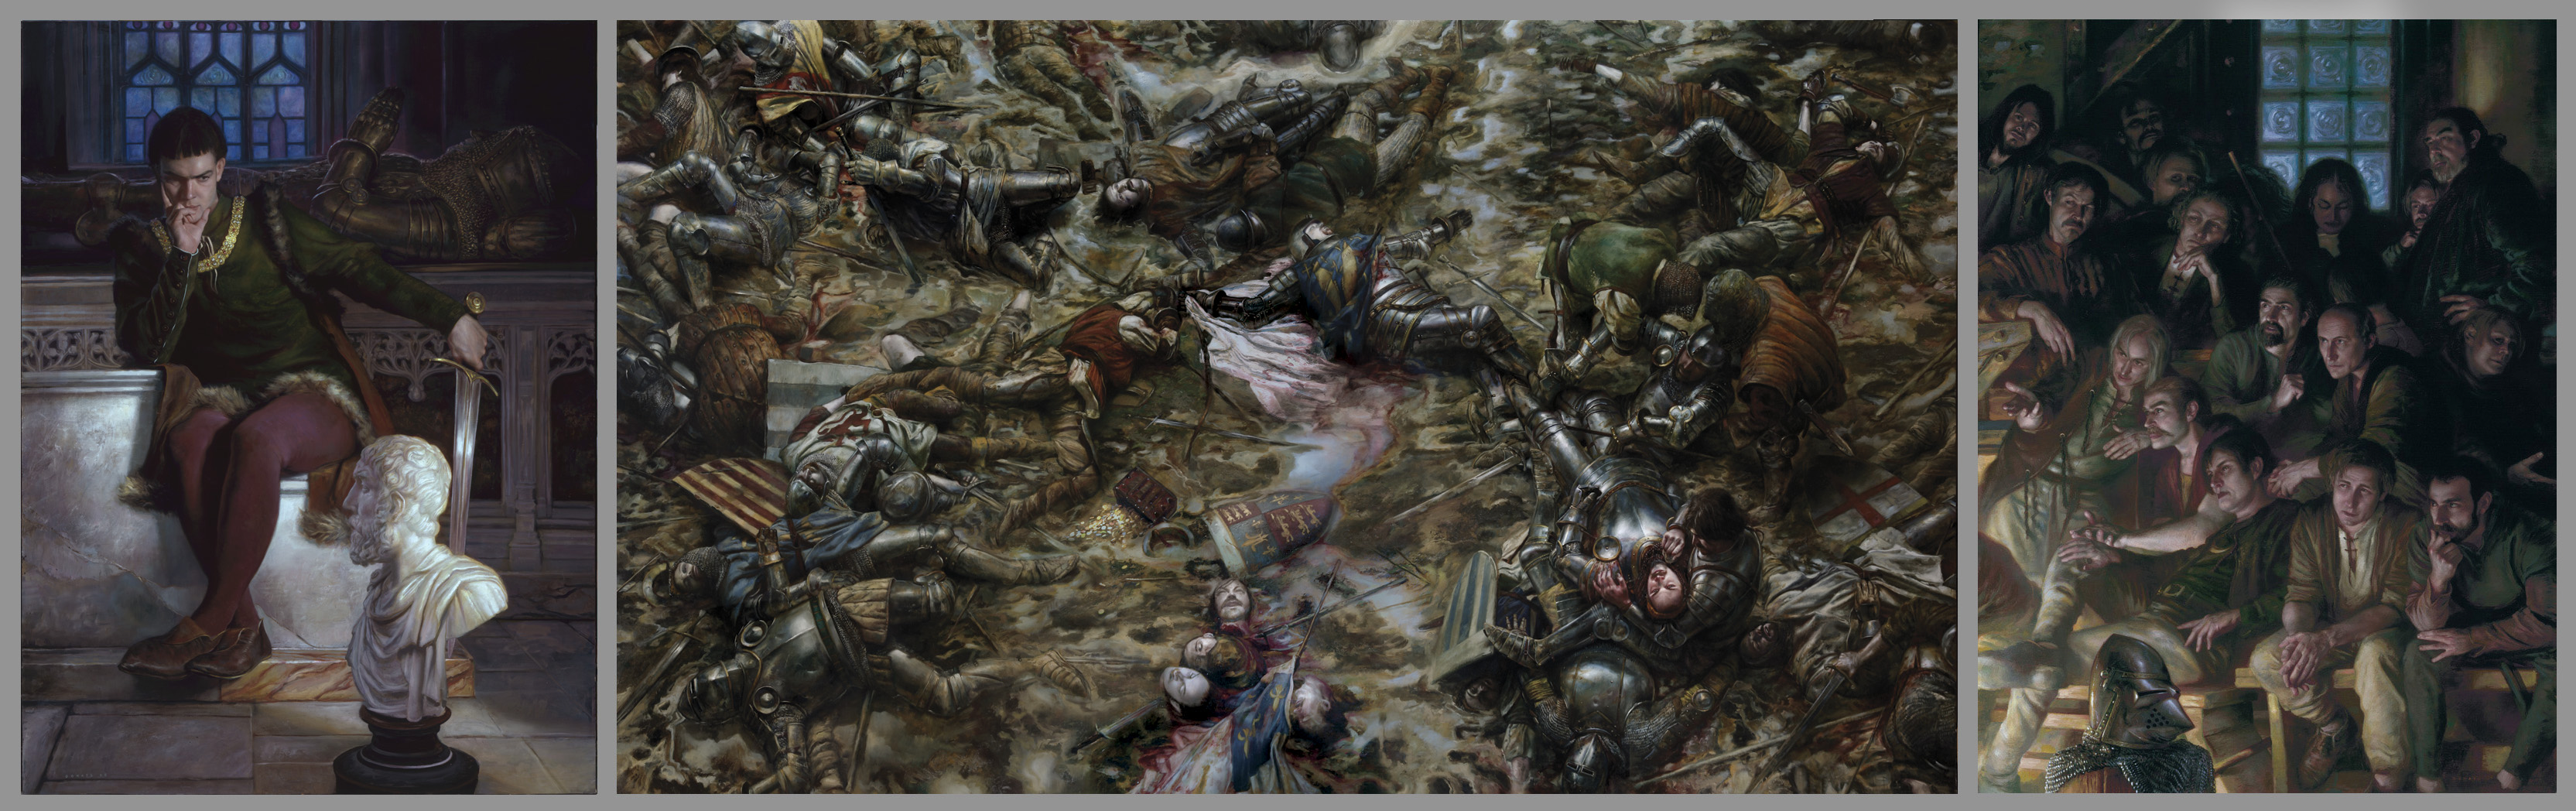 Henry V
The Battle of Agincourt, 25 October 1415
triptych
overall 48" x 168"  Oil on Panel
Collection of Scot Tubbs